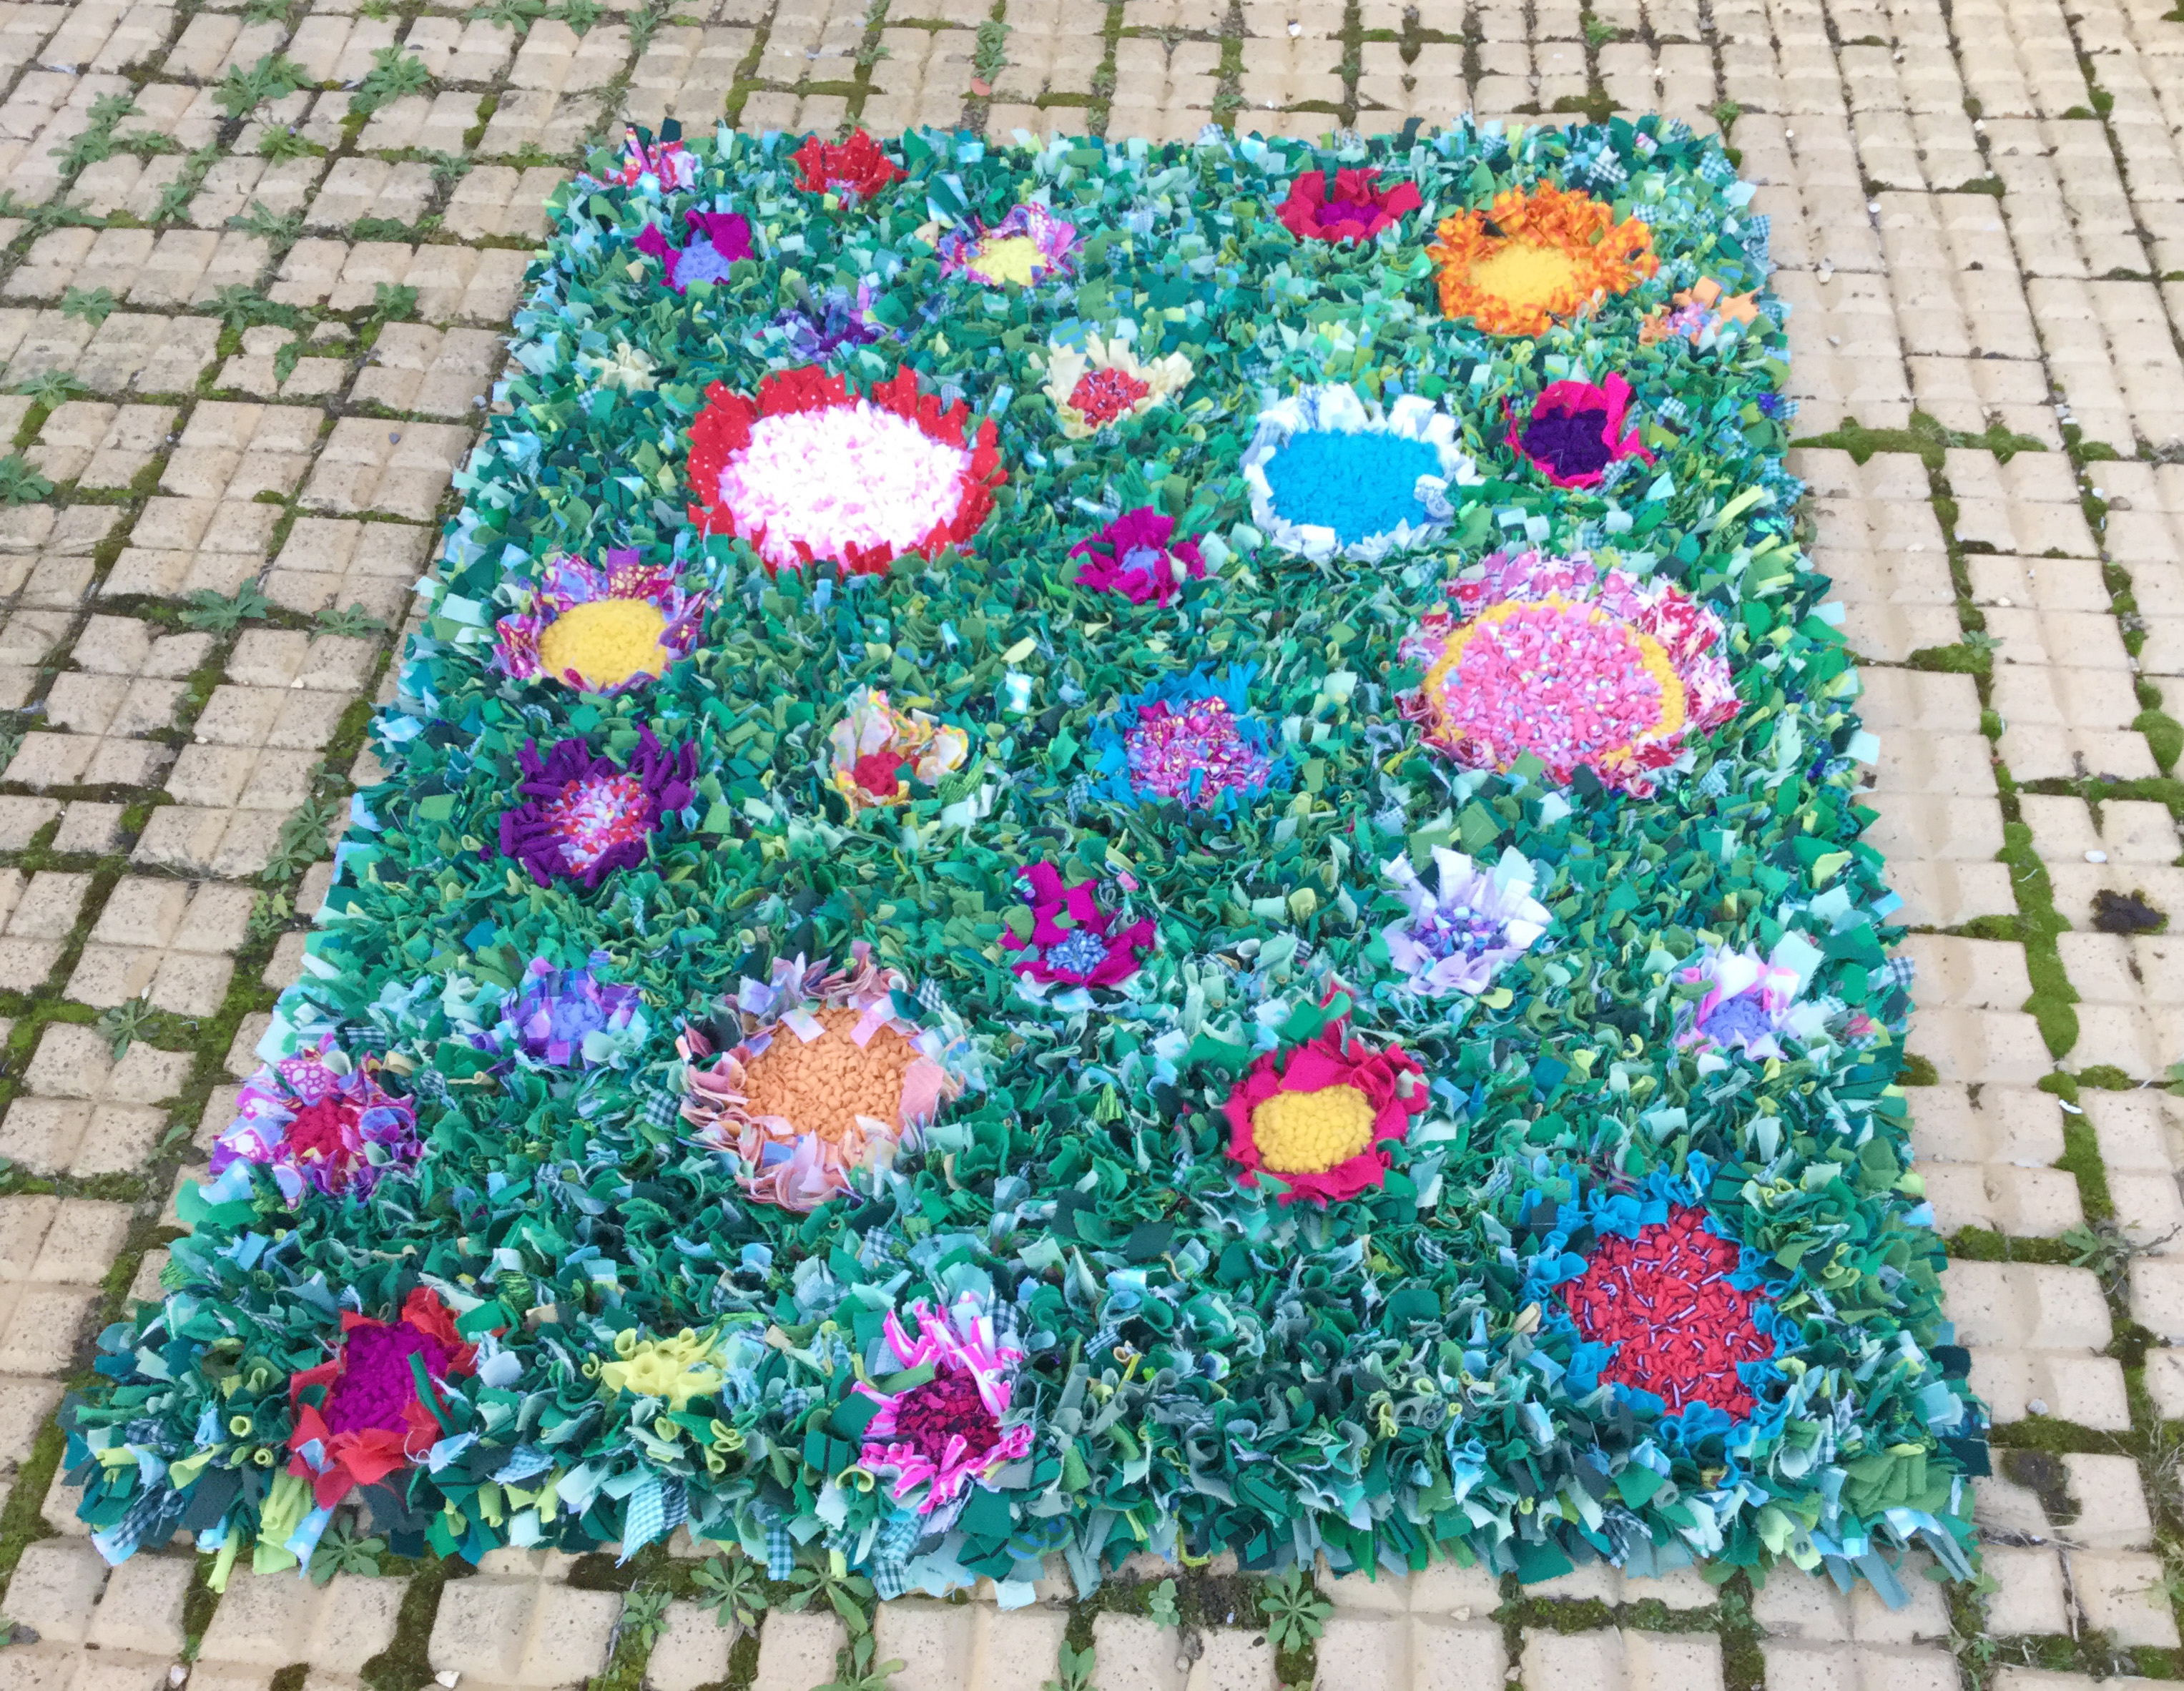 Story time kids rag rug made to look like grass with flowers all over